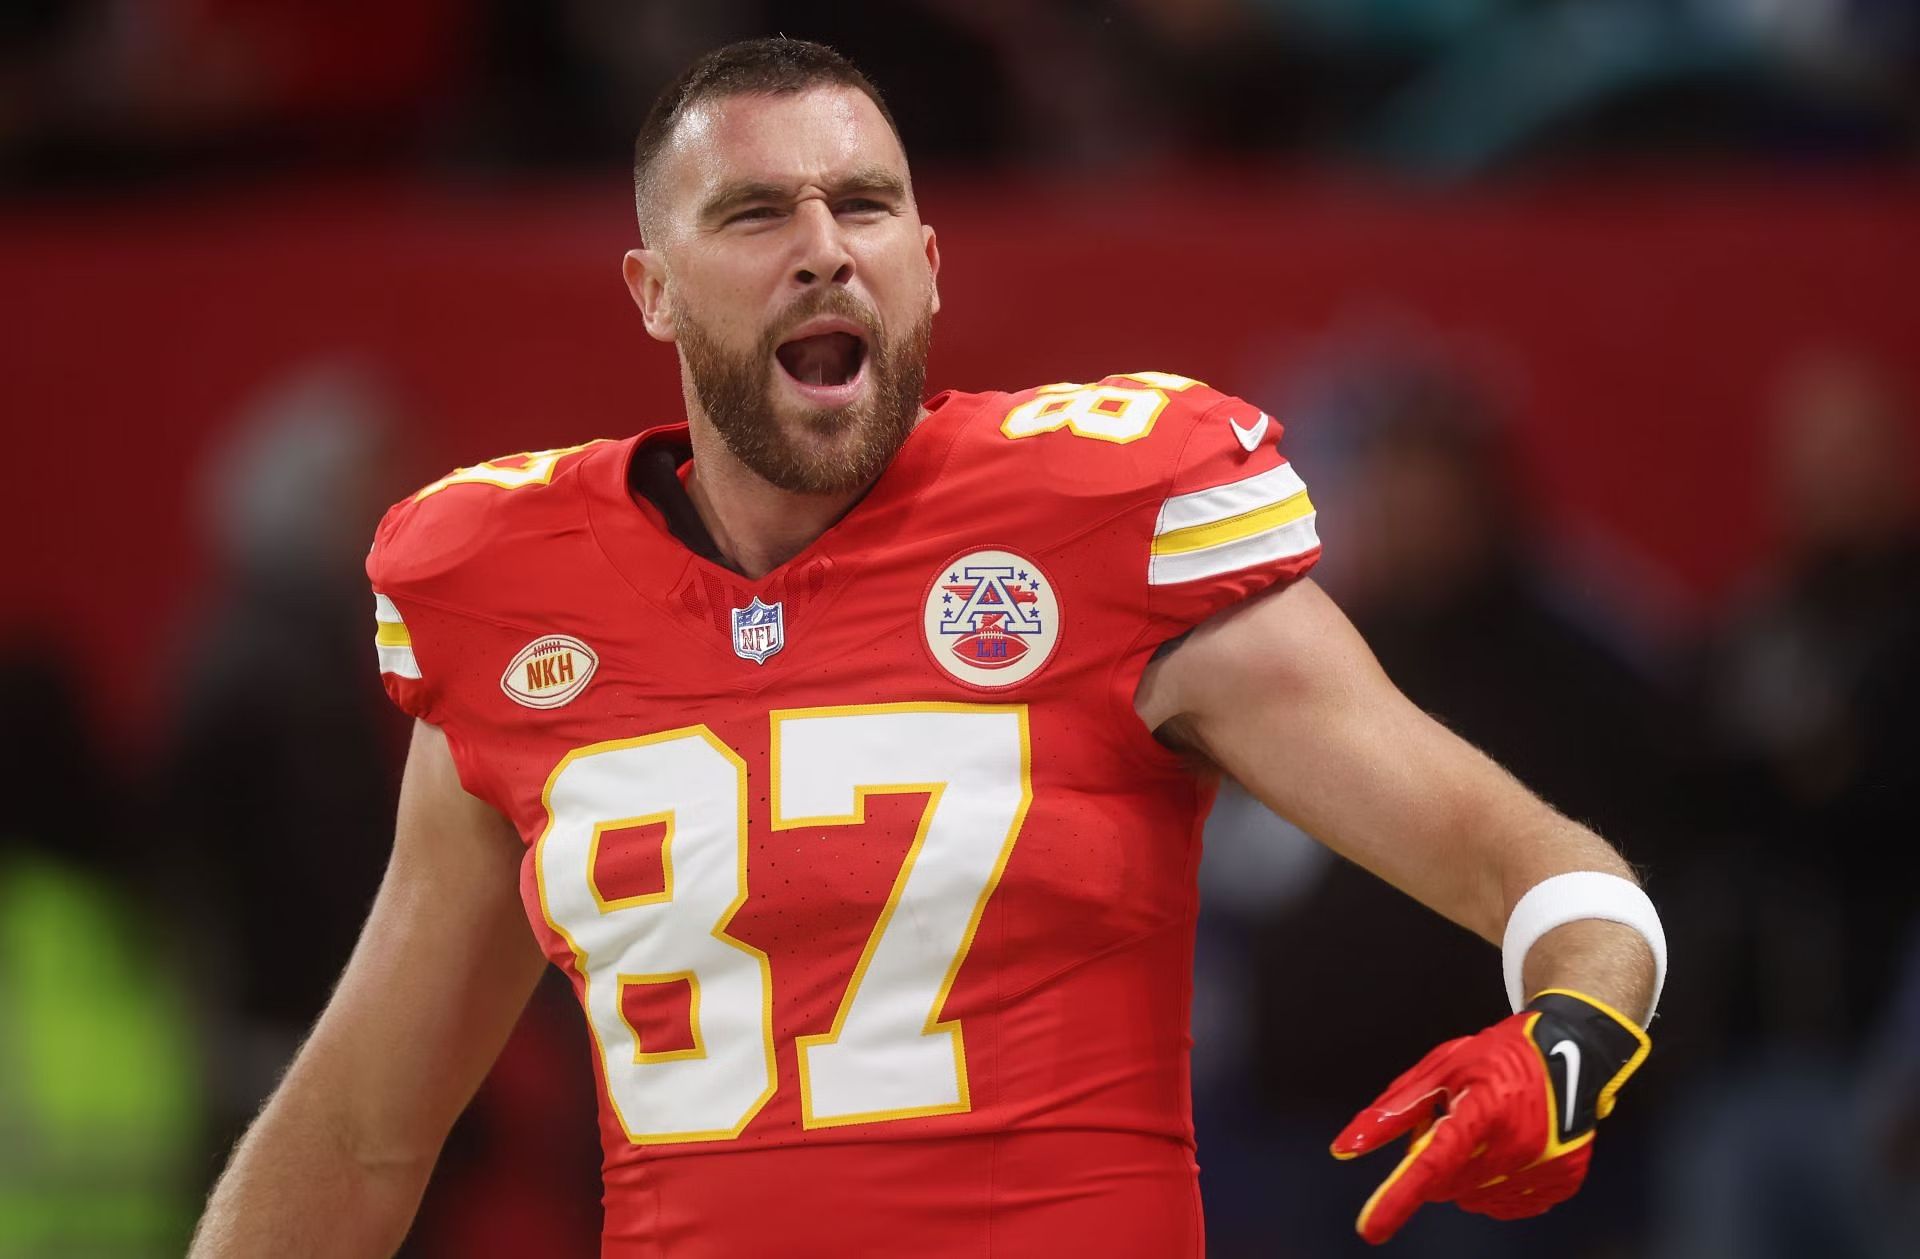 Travis Kelce’s Performance Unaffected By Taylor Swift Relationship, Says Former NFL Player